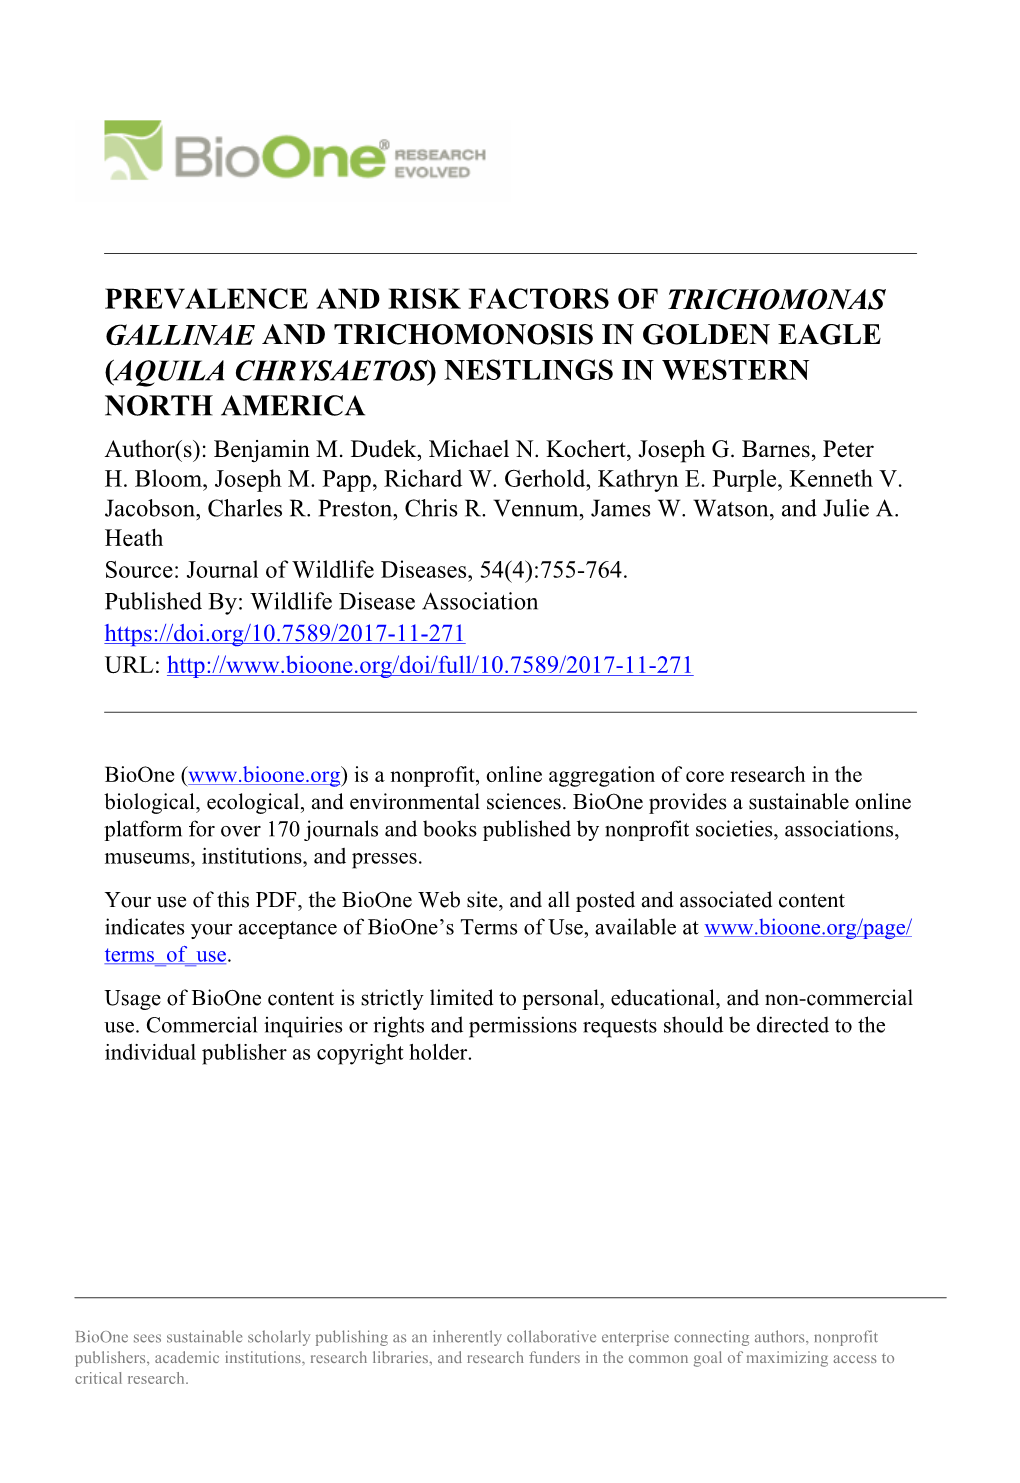 PREVALENCE and RISK FACTORS of TRICHOMONAS GALLINAE and TRICHOMONOSIS in GOLDEN EAGLE (AQUILA CHRYSAETOS) NESTLINGS in WESTERN NORTH AMERICA Author(S): Benjamin M